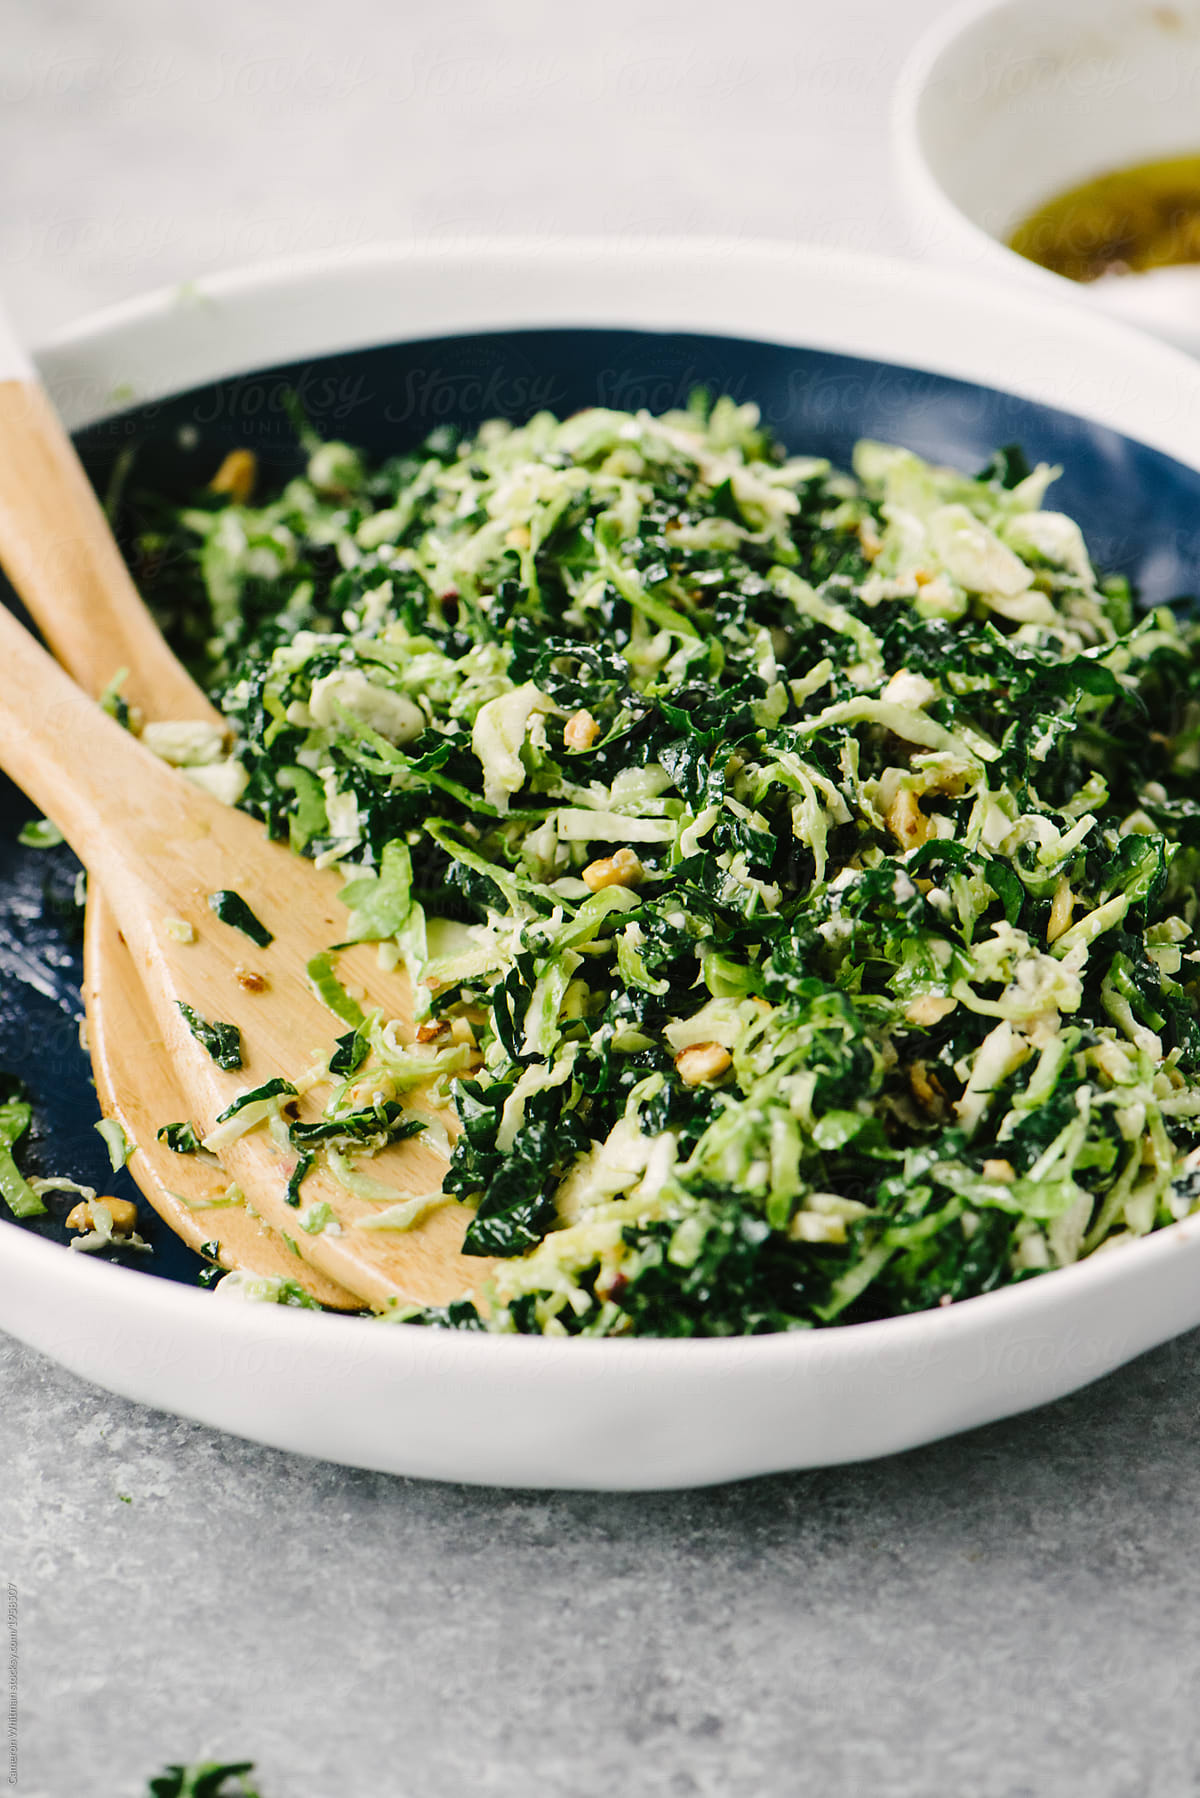 Broccoli and Brussels Sprout Salad with Roasted Hazelnut Vinaigrette